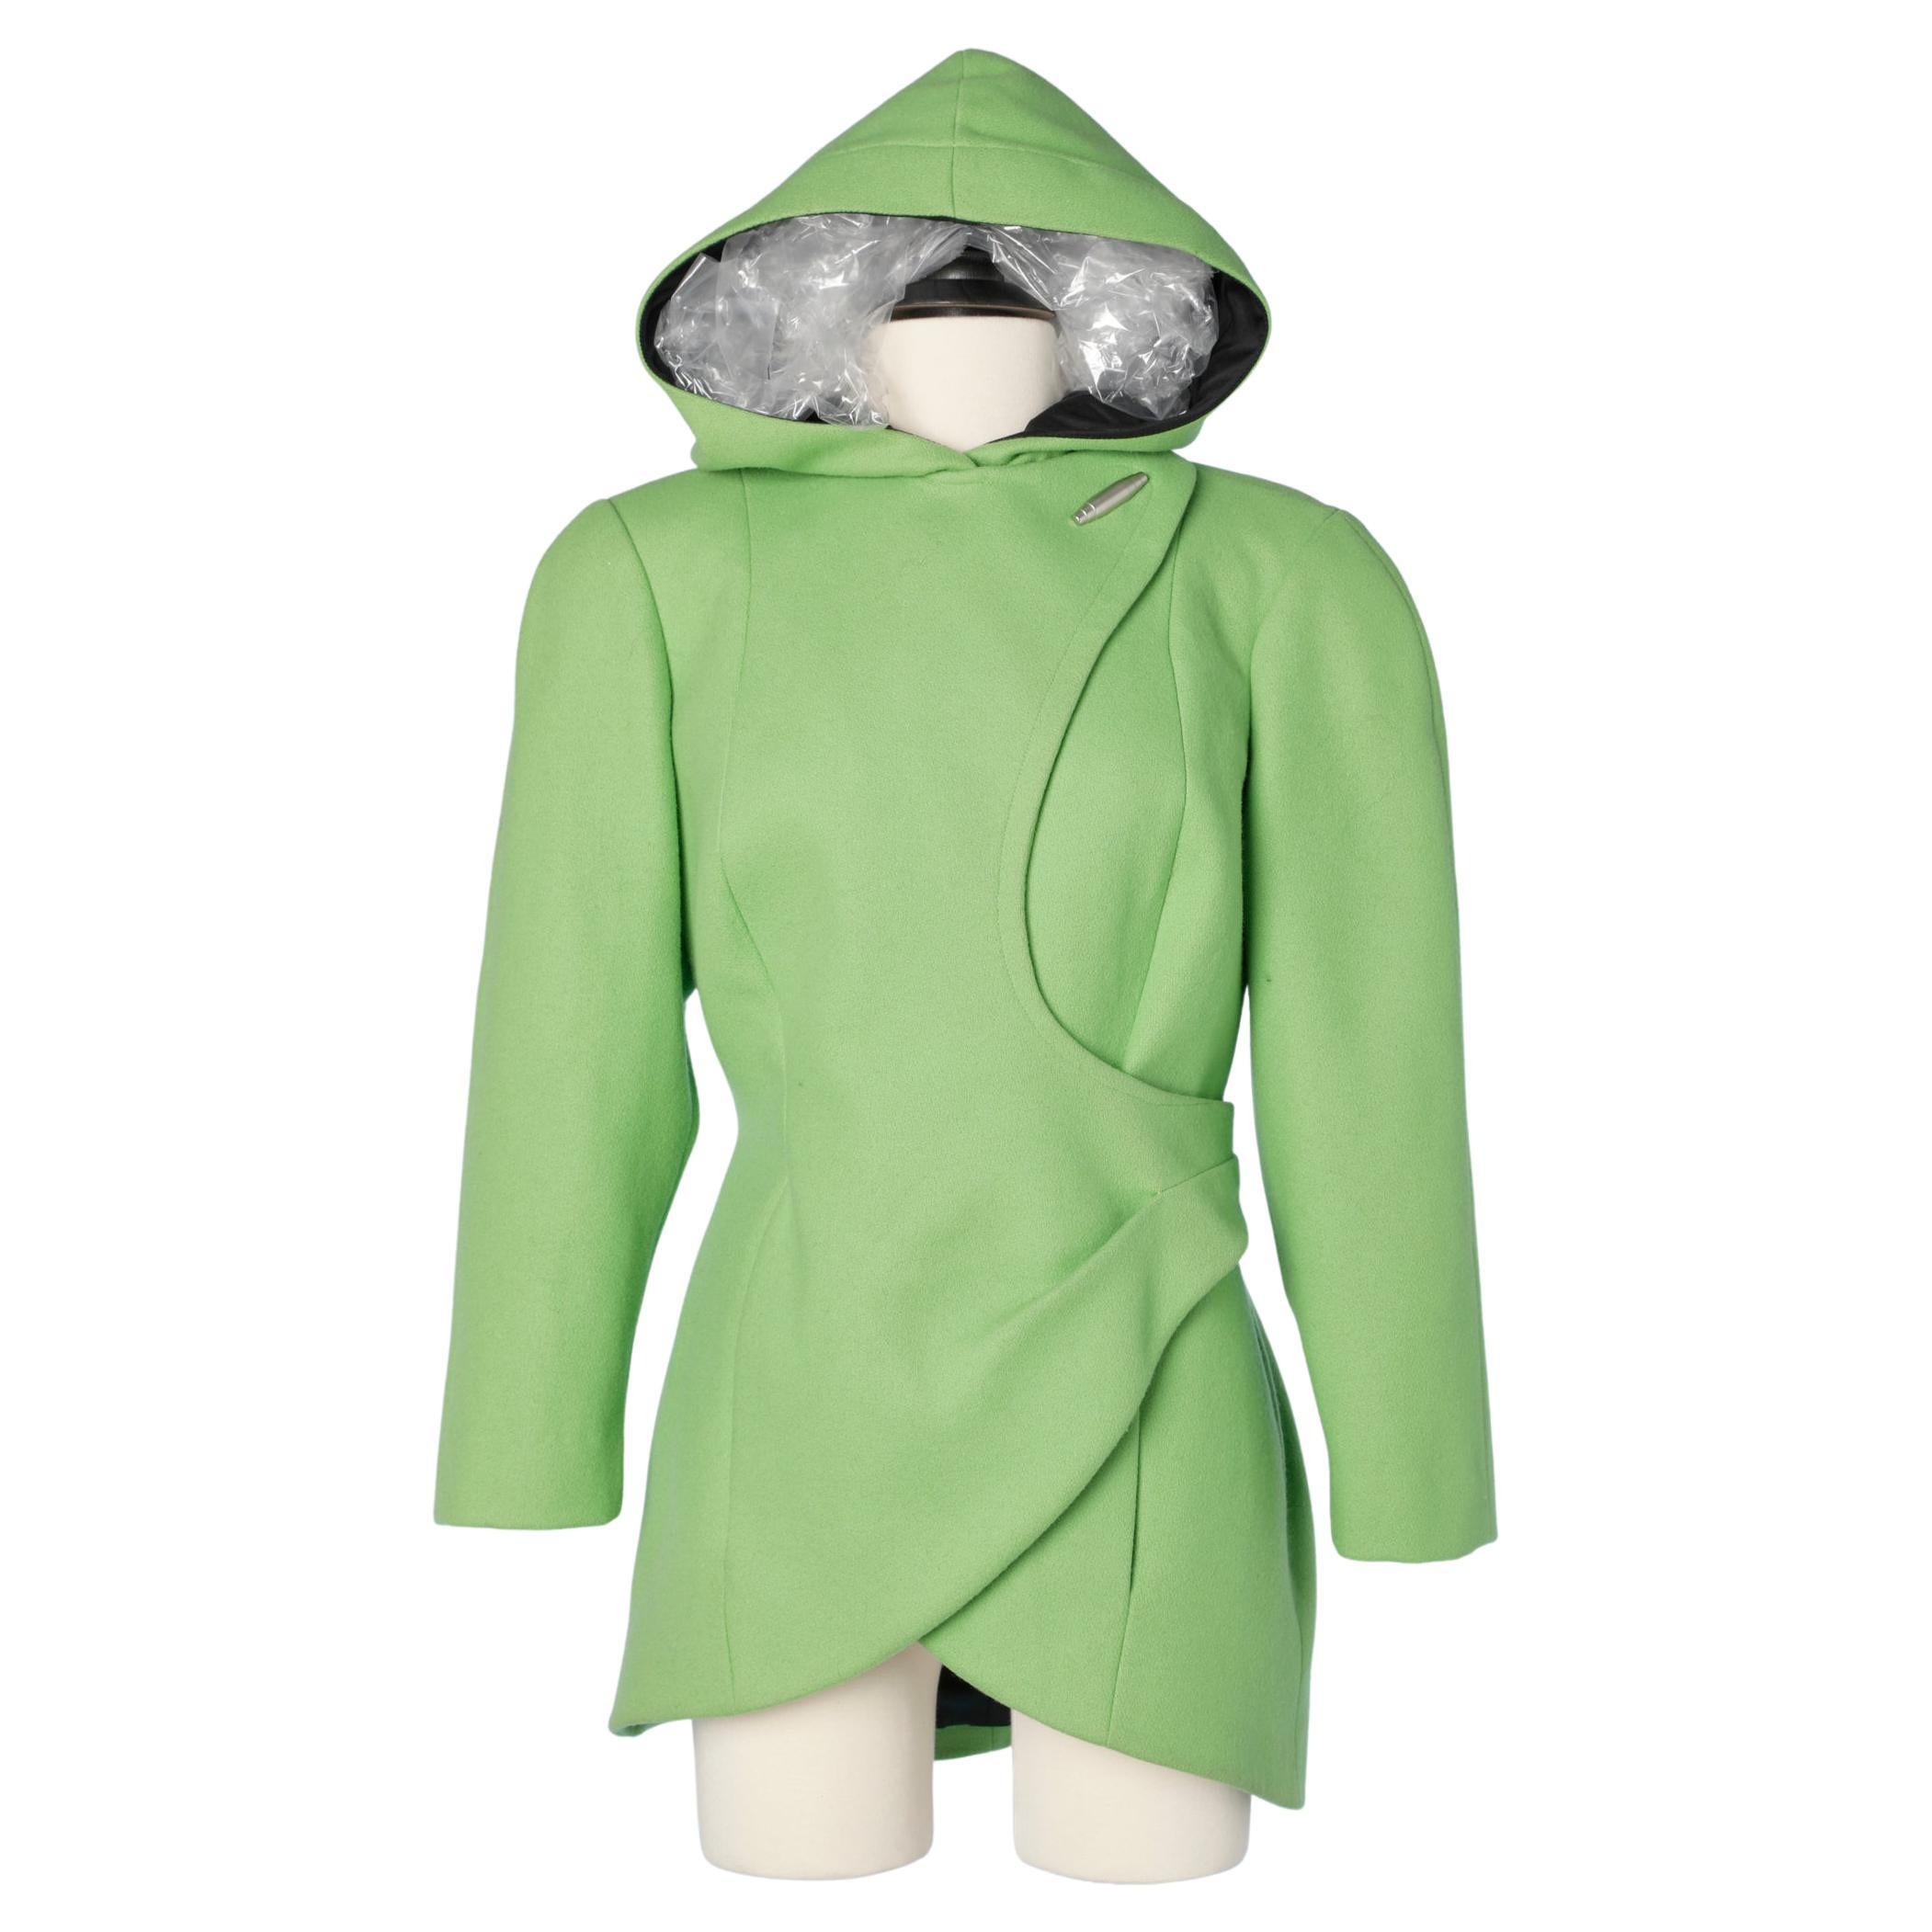 Apple green wool wrapped jacket with hood Thierry Mugler Activ